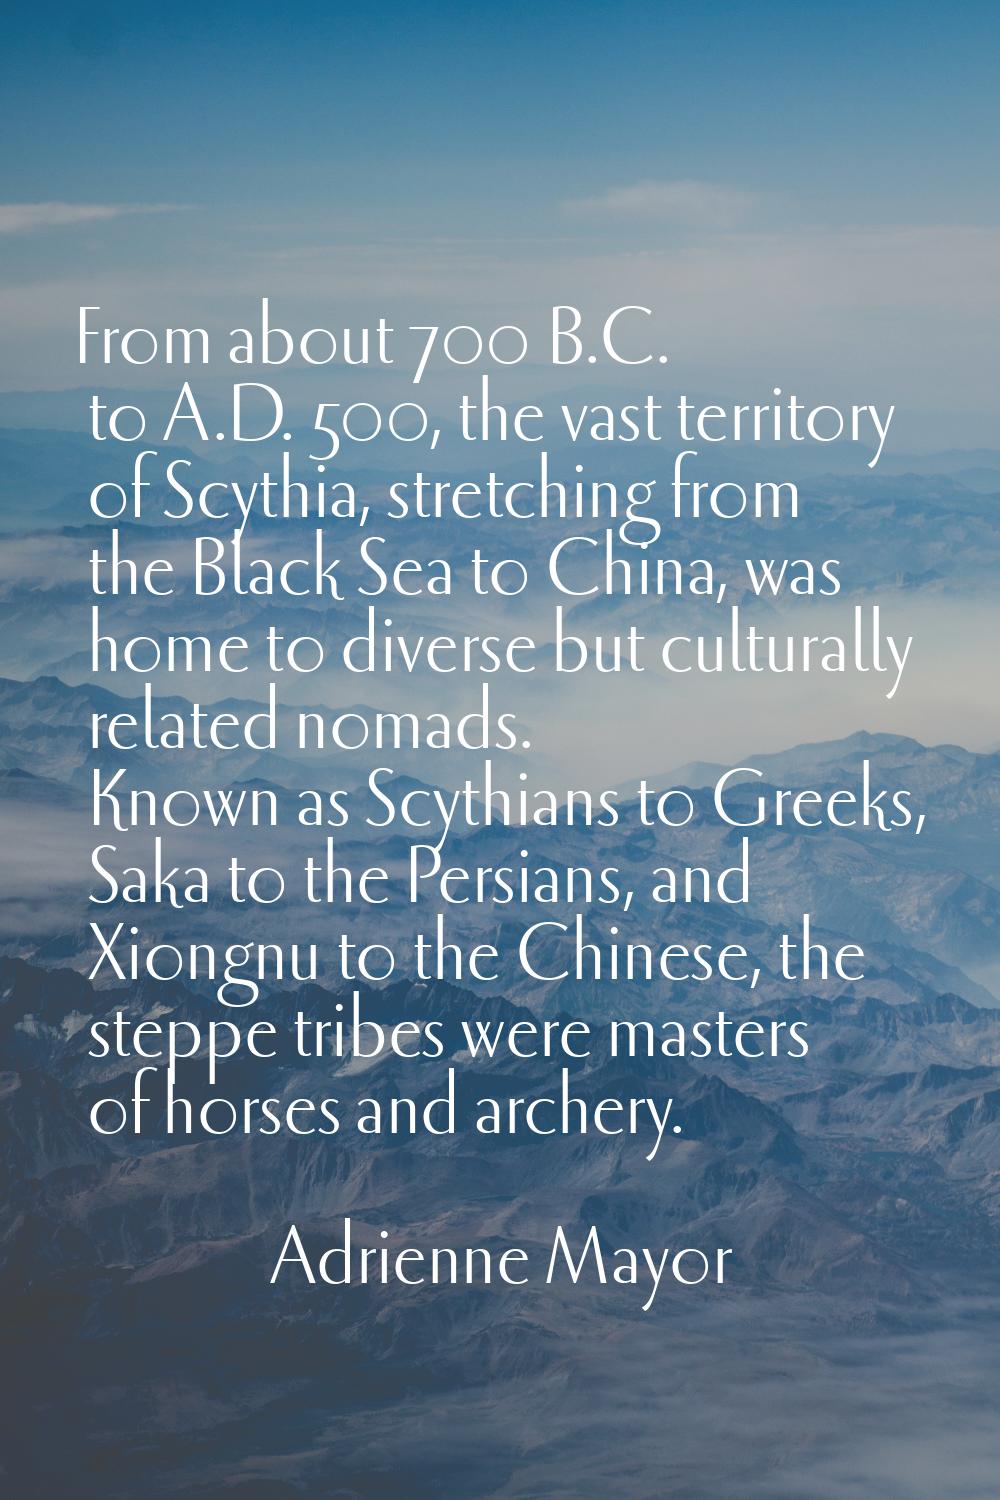 From about 700 B.C. to A.D. 500, the vast territory of Scythia, stretching from the Black Sea to Ch